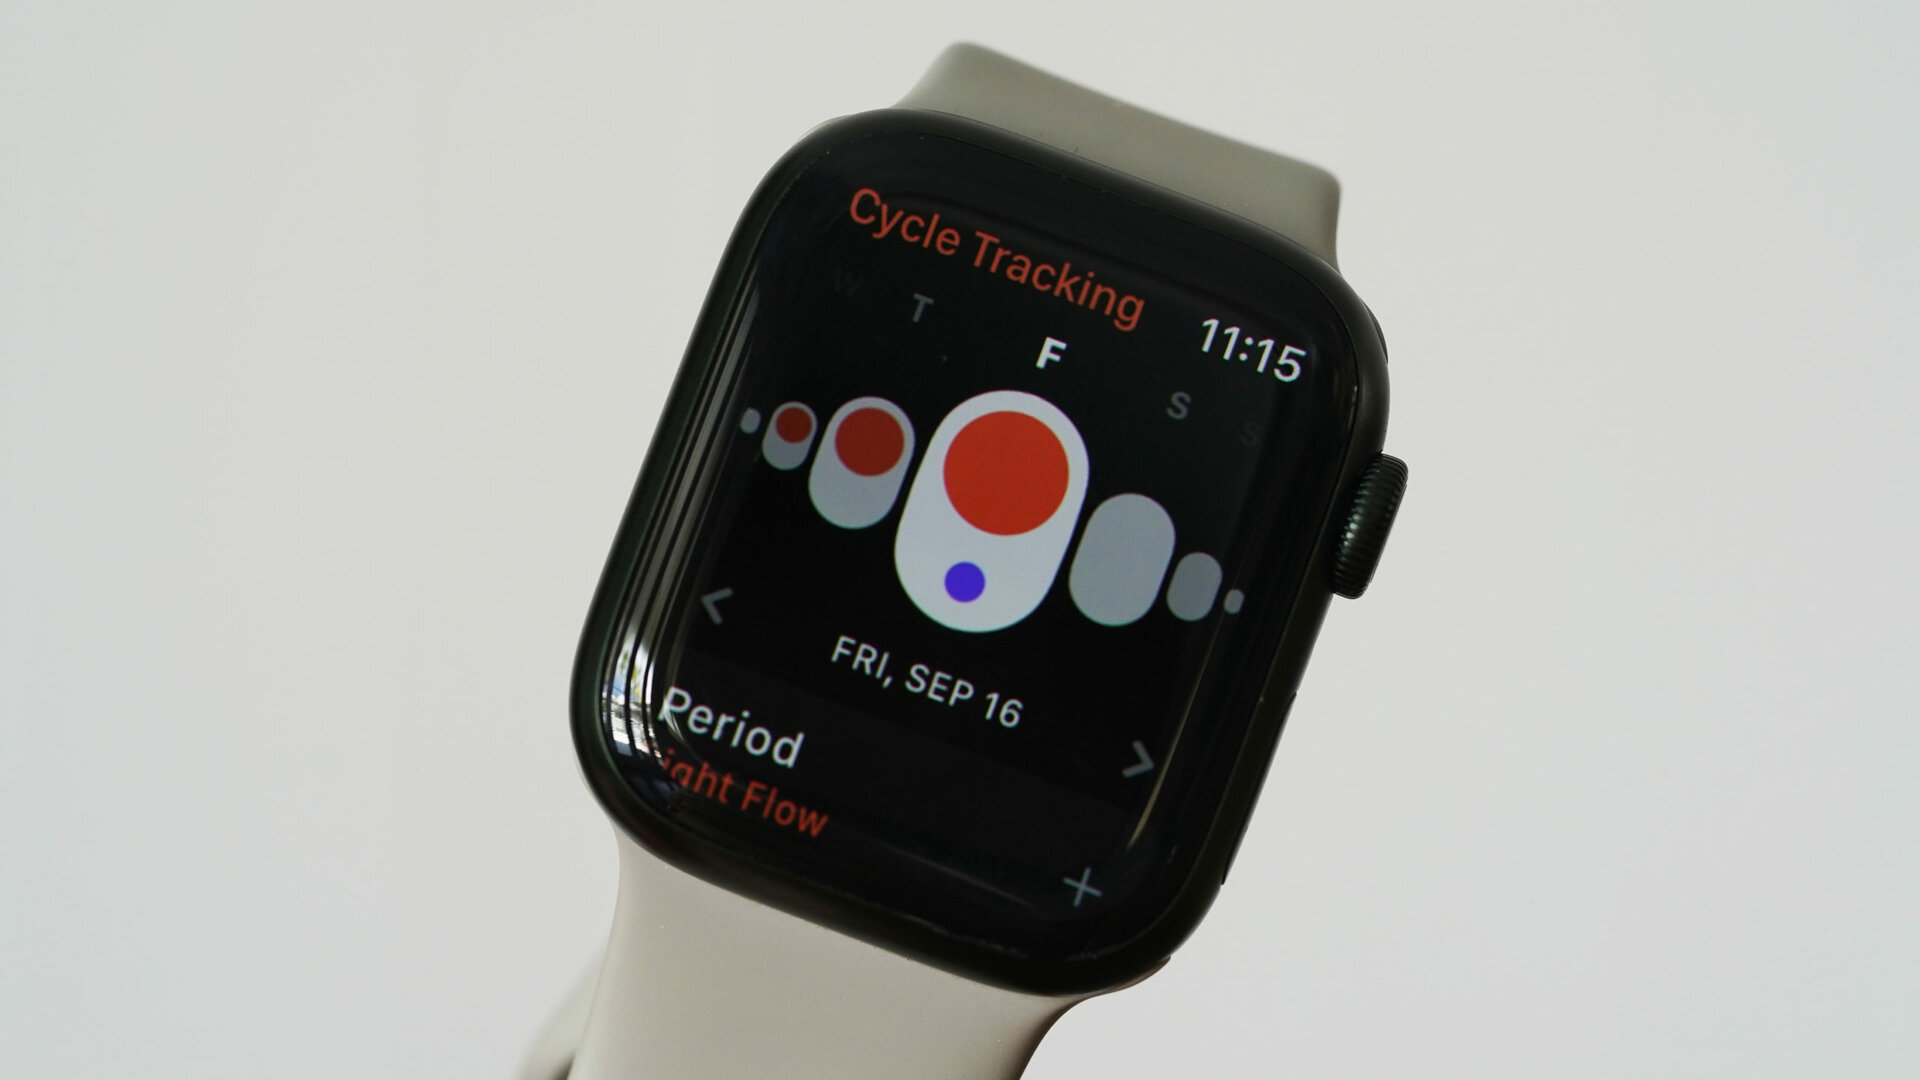 Apple Watch female health tracking: Everything you need to know